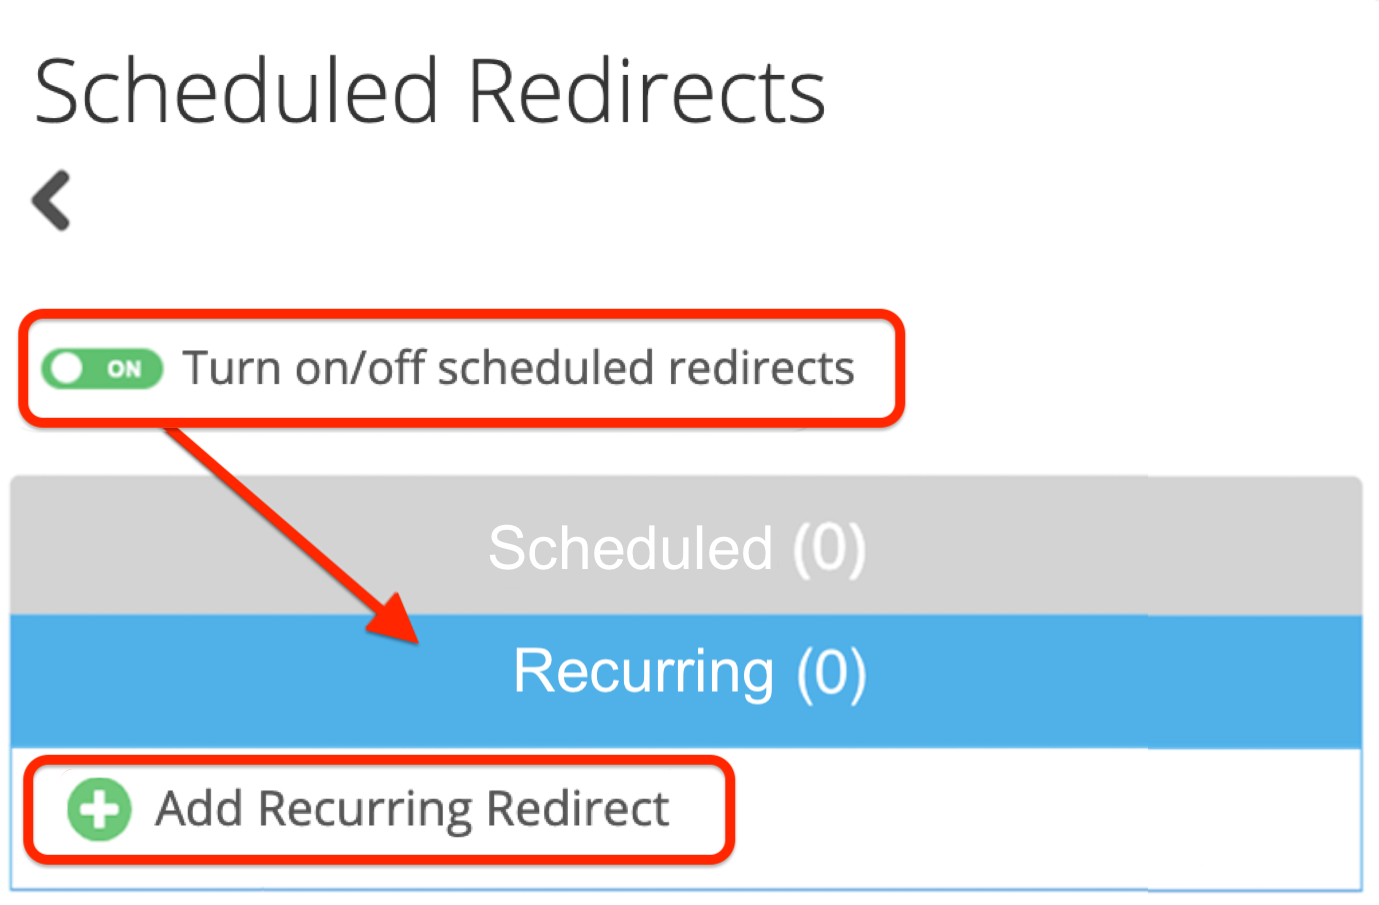 Dialog for creating recurring redirects